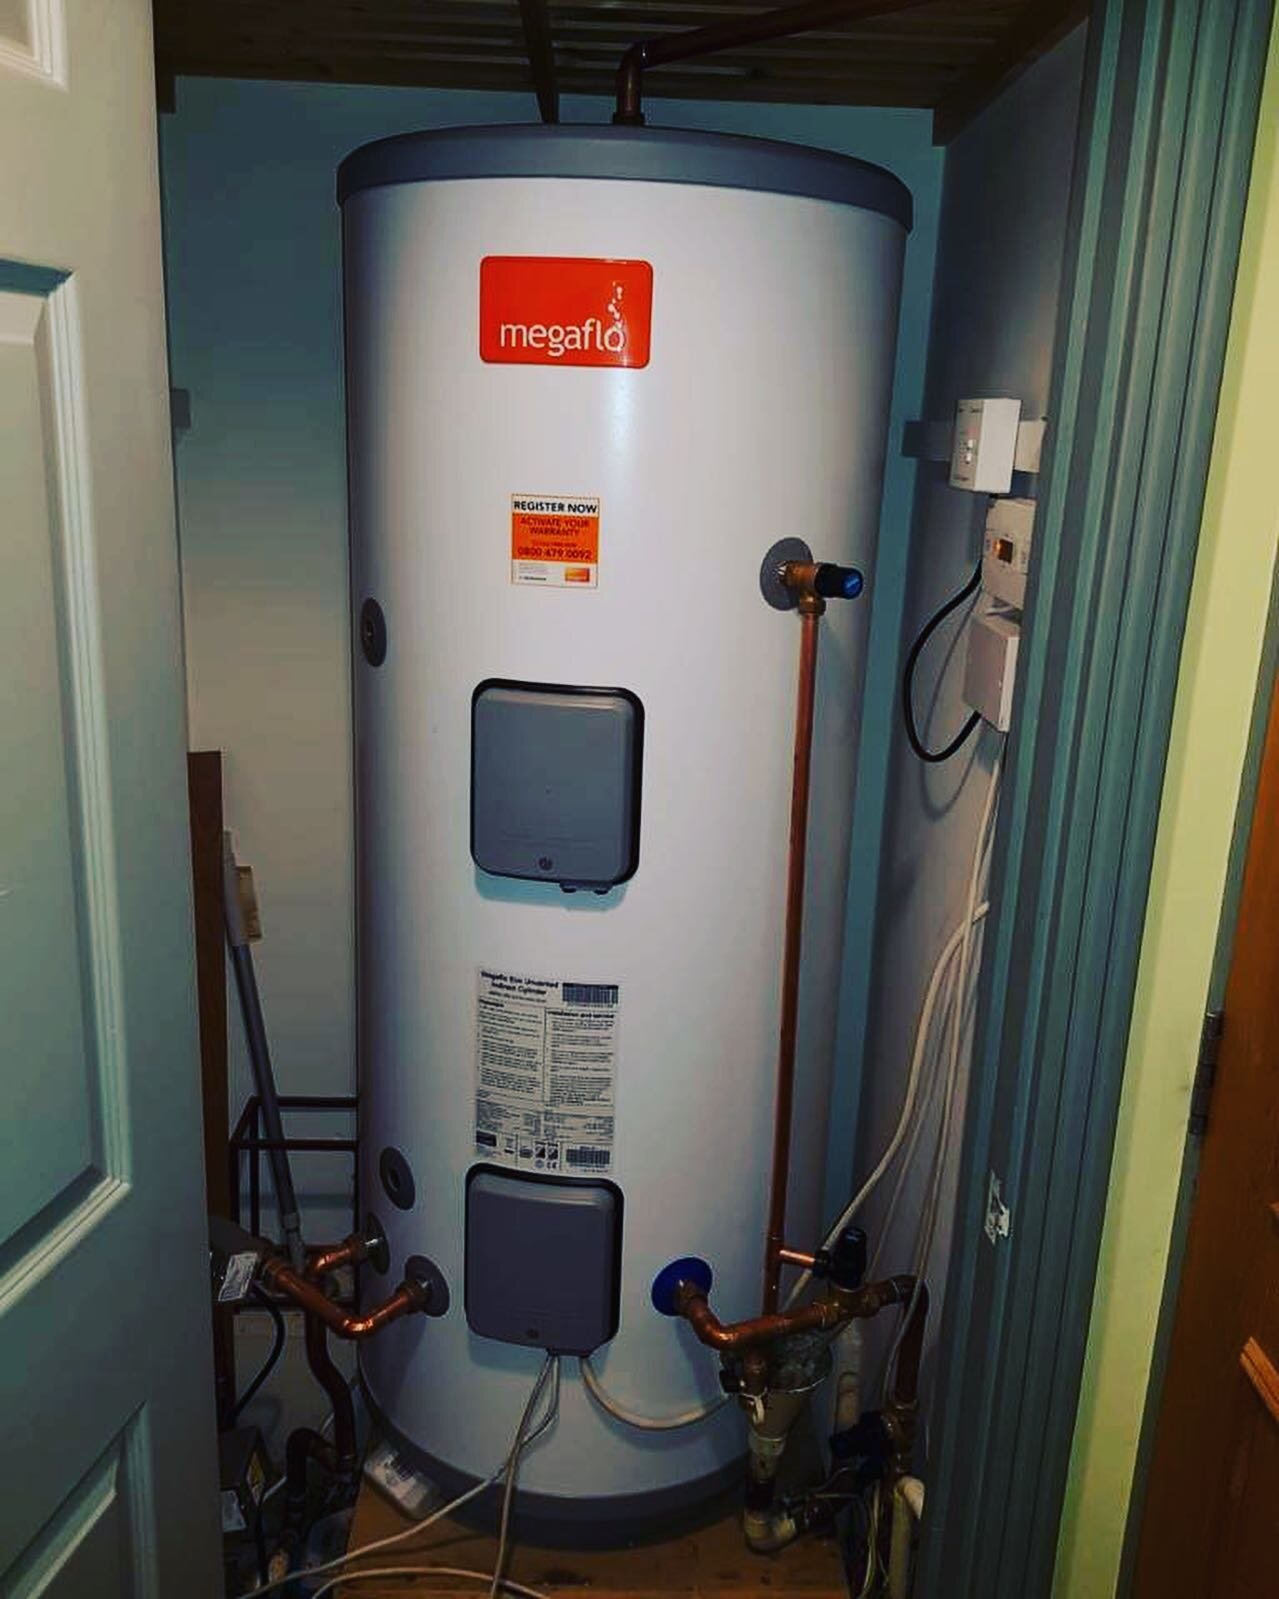 Our final result after our client had a leaking unvented cylinder, we replaced with it with a #megaflo with 25 year warranty.

Providing mains water pressure supply directly to the hot water storage cylinder for faster filling bath 🛁, powerful showe